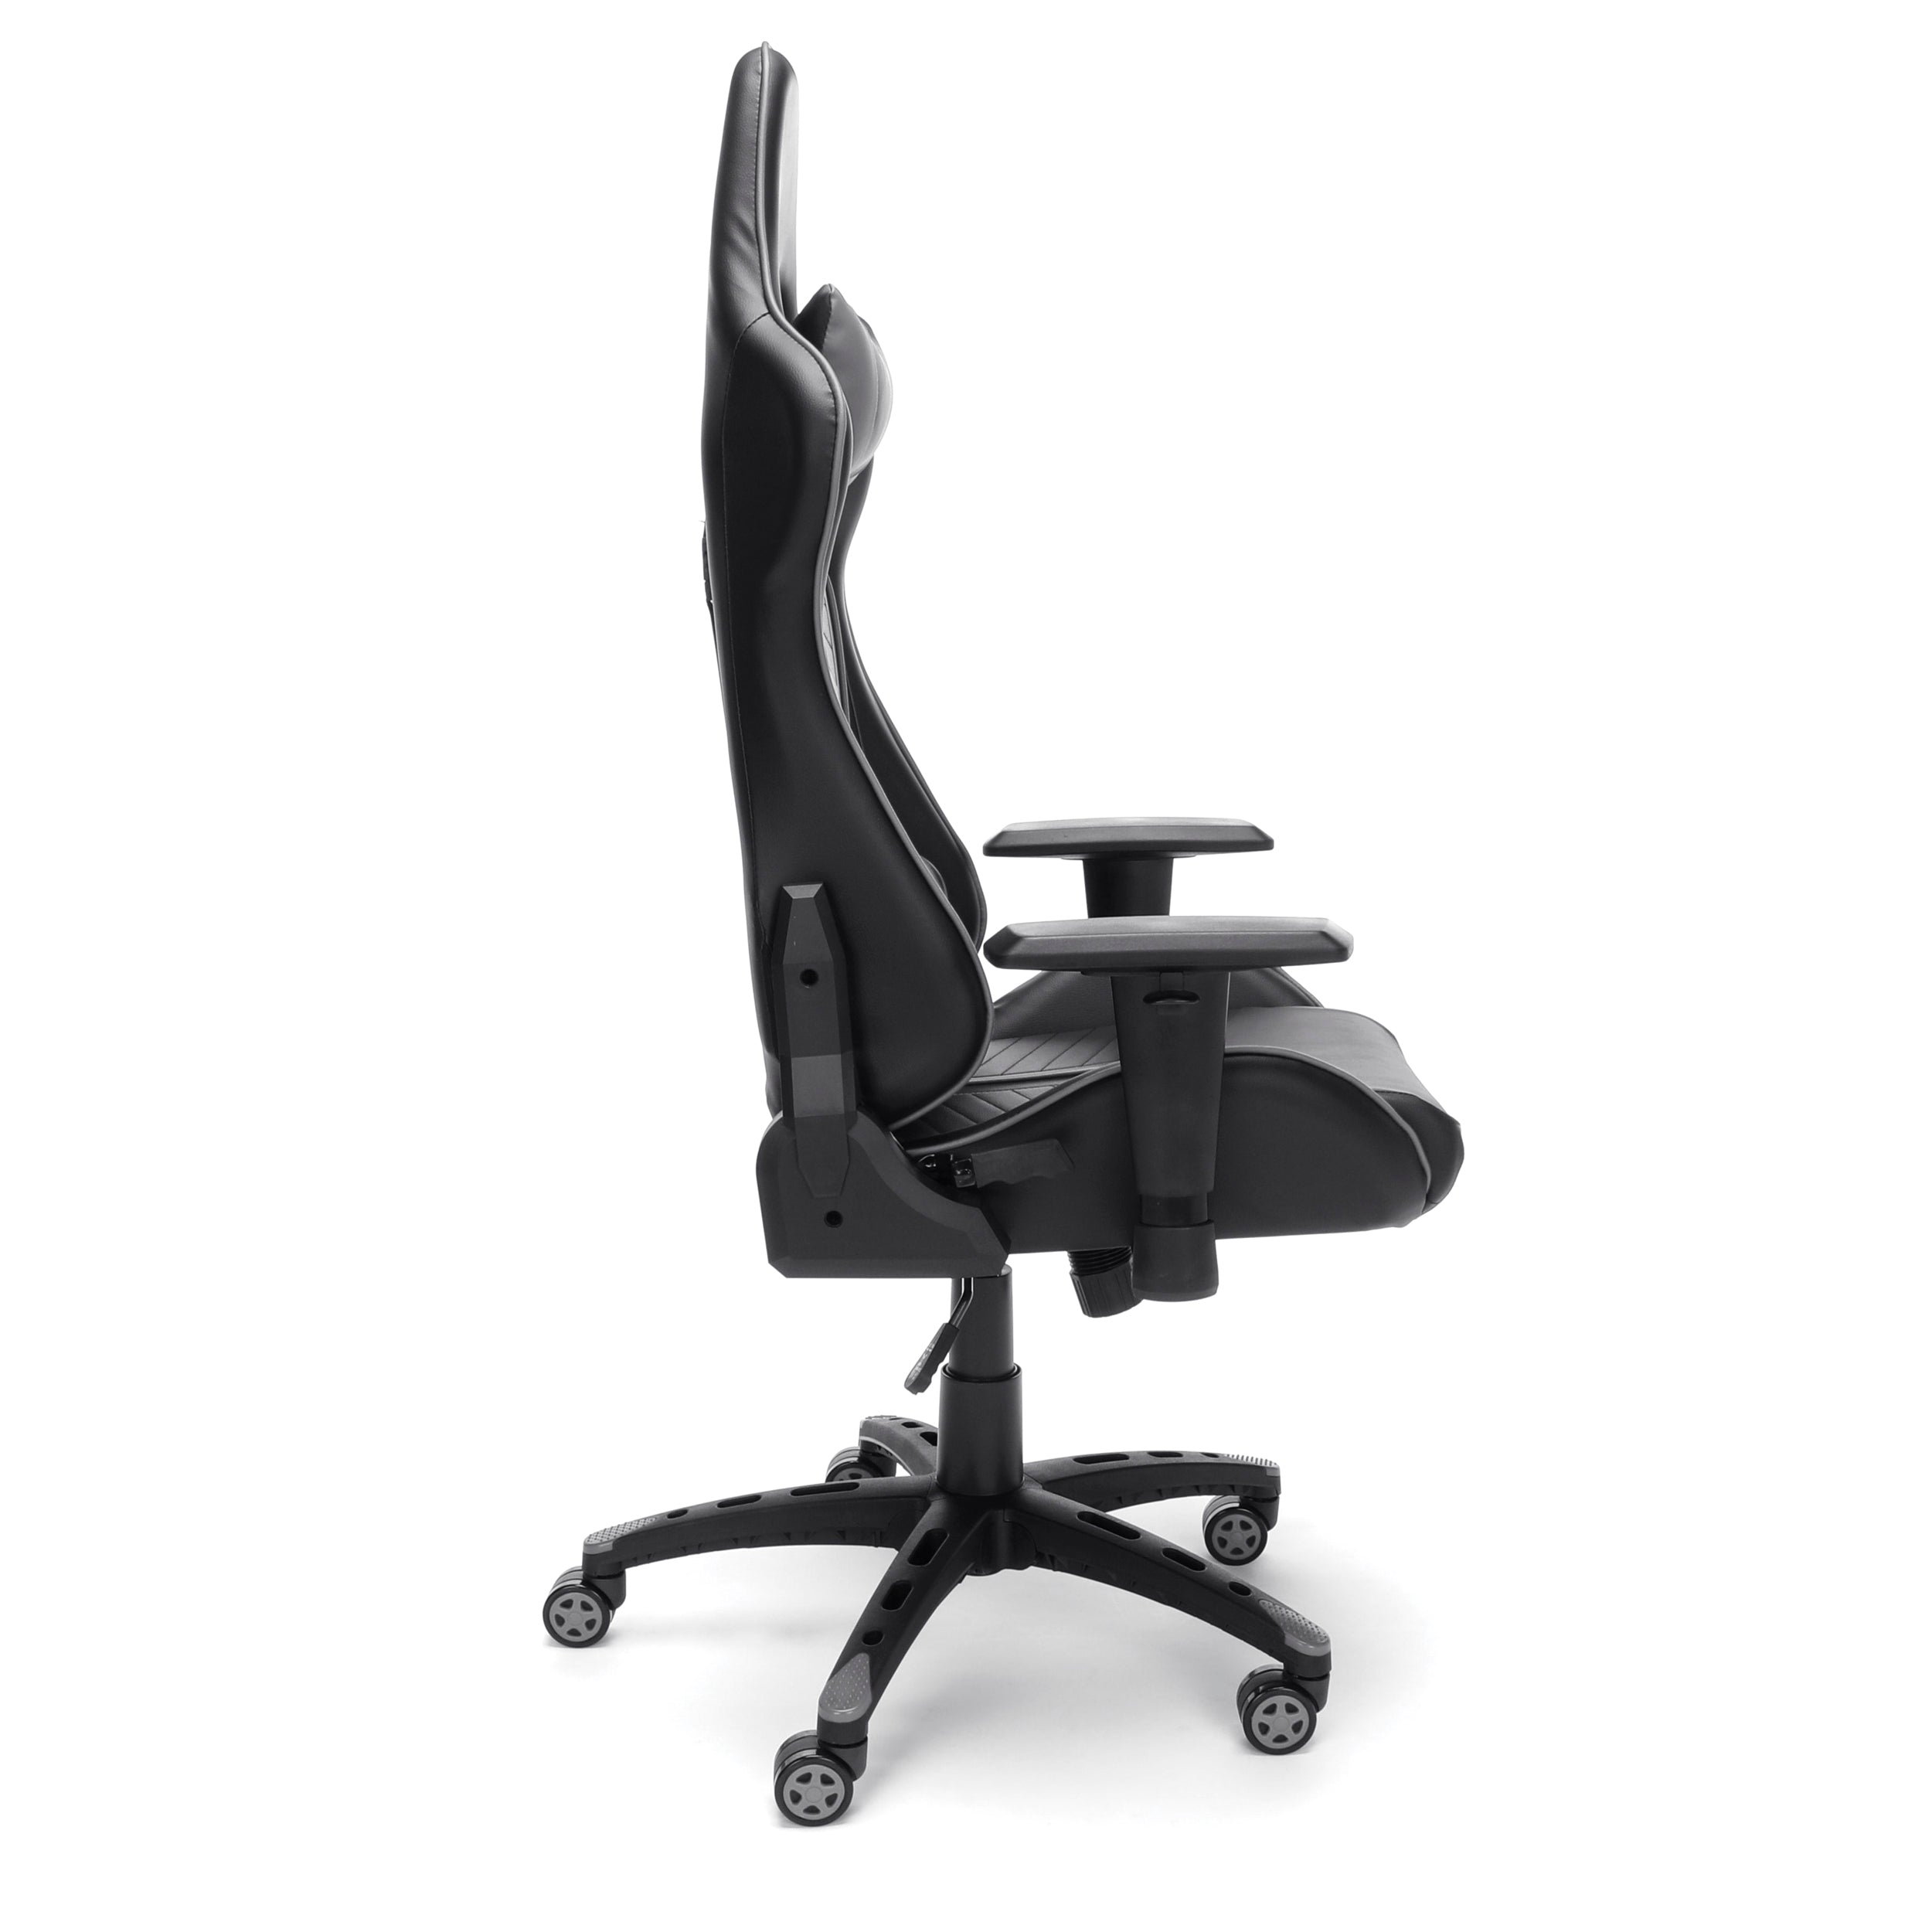 Height Adjustable Reclining Gaming Chair For Home Office Use Black and Gray